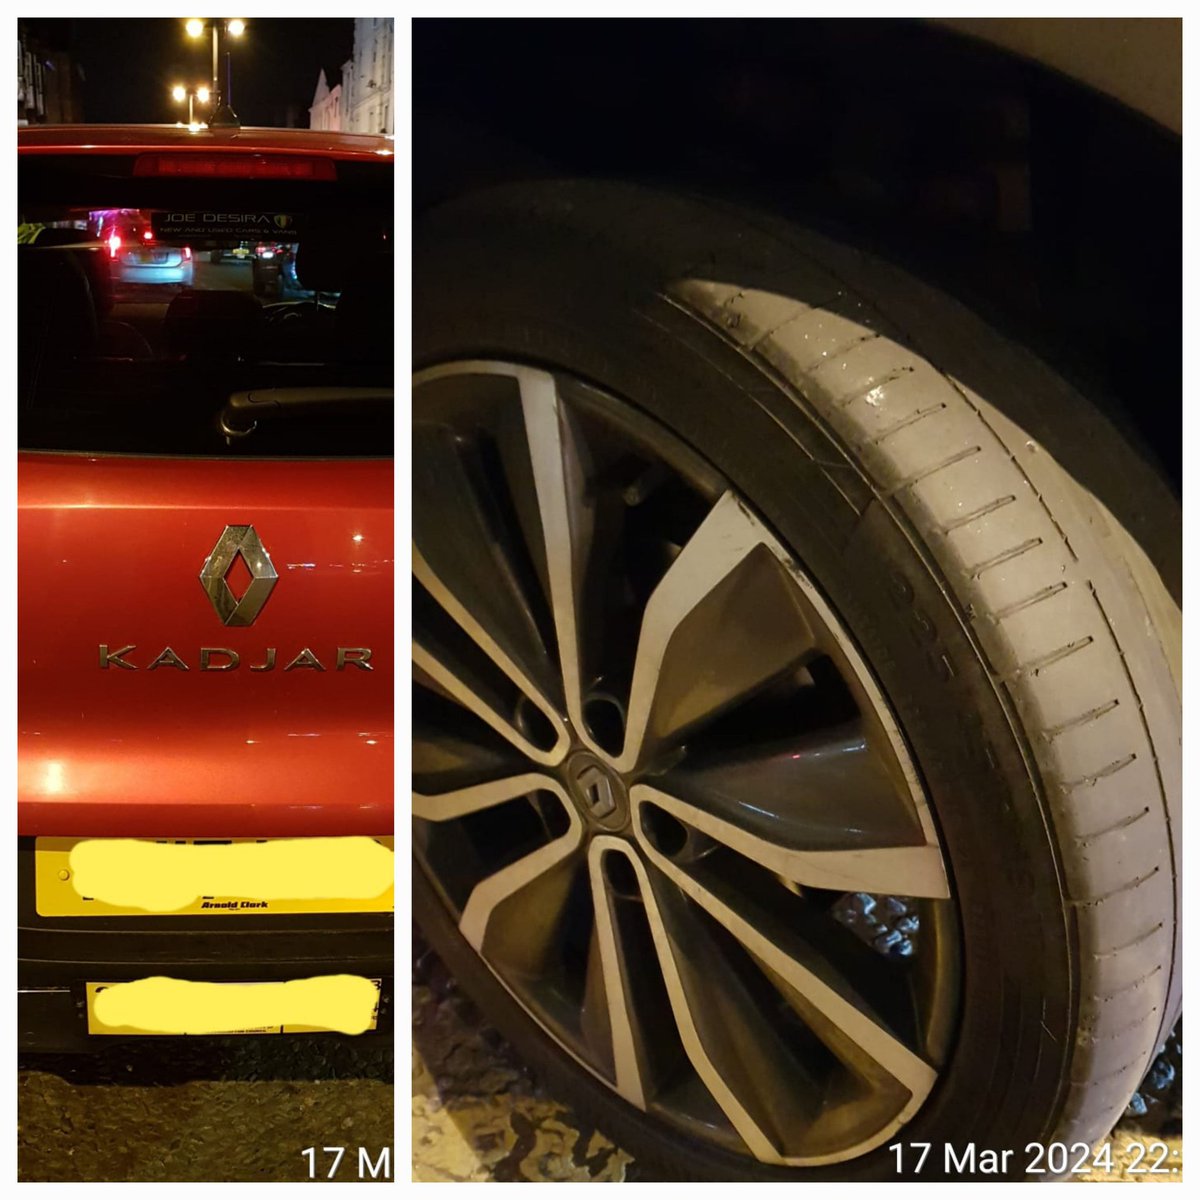 Licensing Officers discovered this Wolverhampton PHV operating in Liverpool last night with an illegal tyre. The vehicles Private Hire Licence was suspended, and the driver reported for the offence